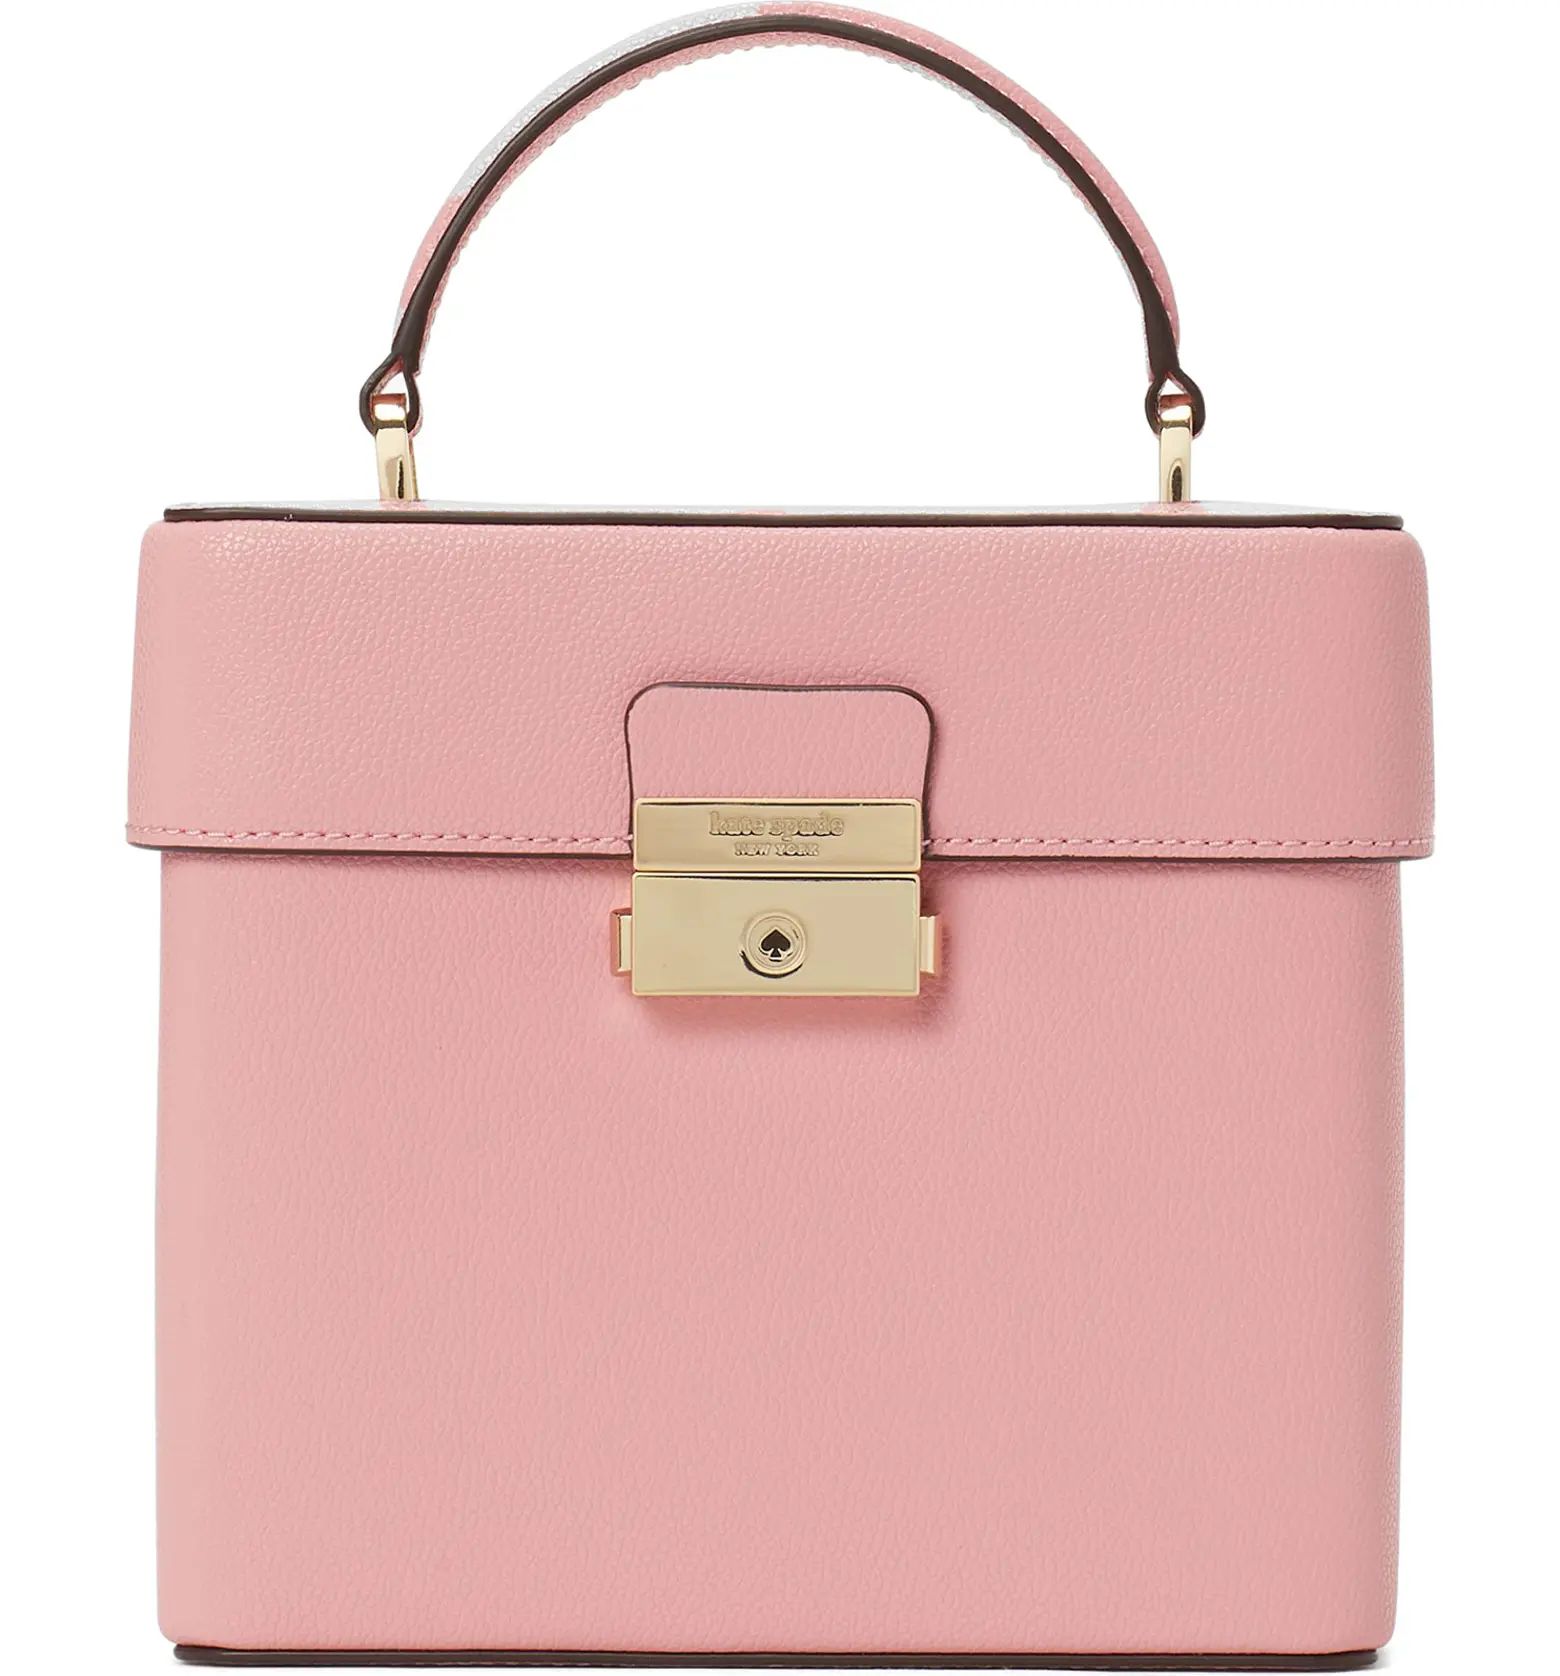 kate spade new york voyage small leather crossbody bag | Nordstrom | Nordstrom